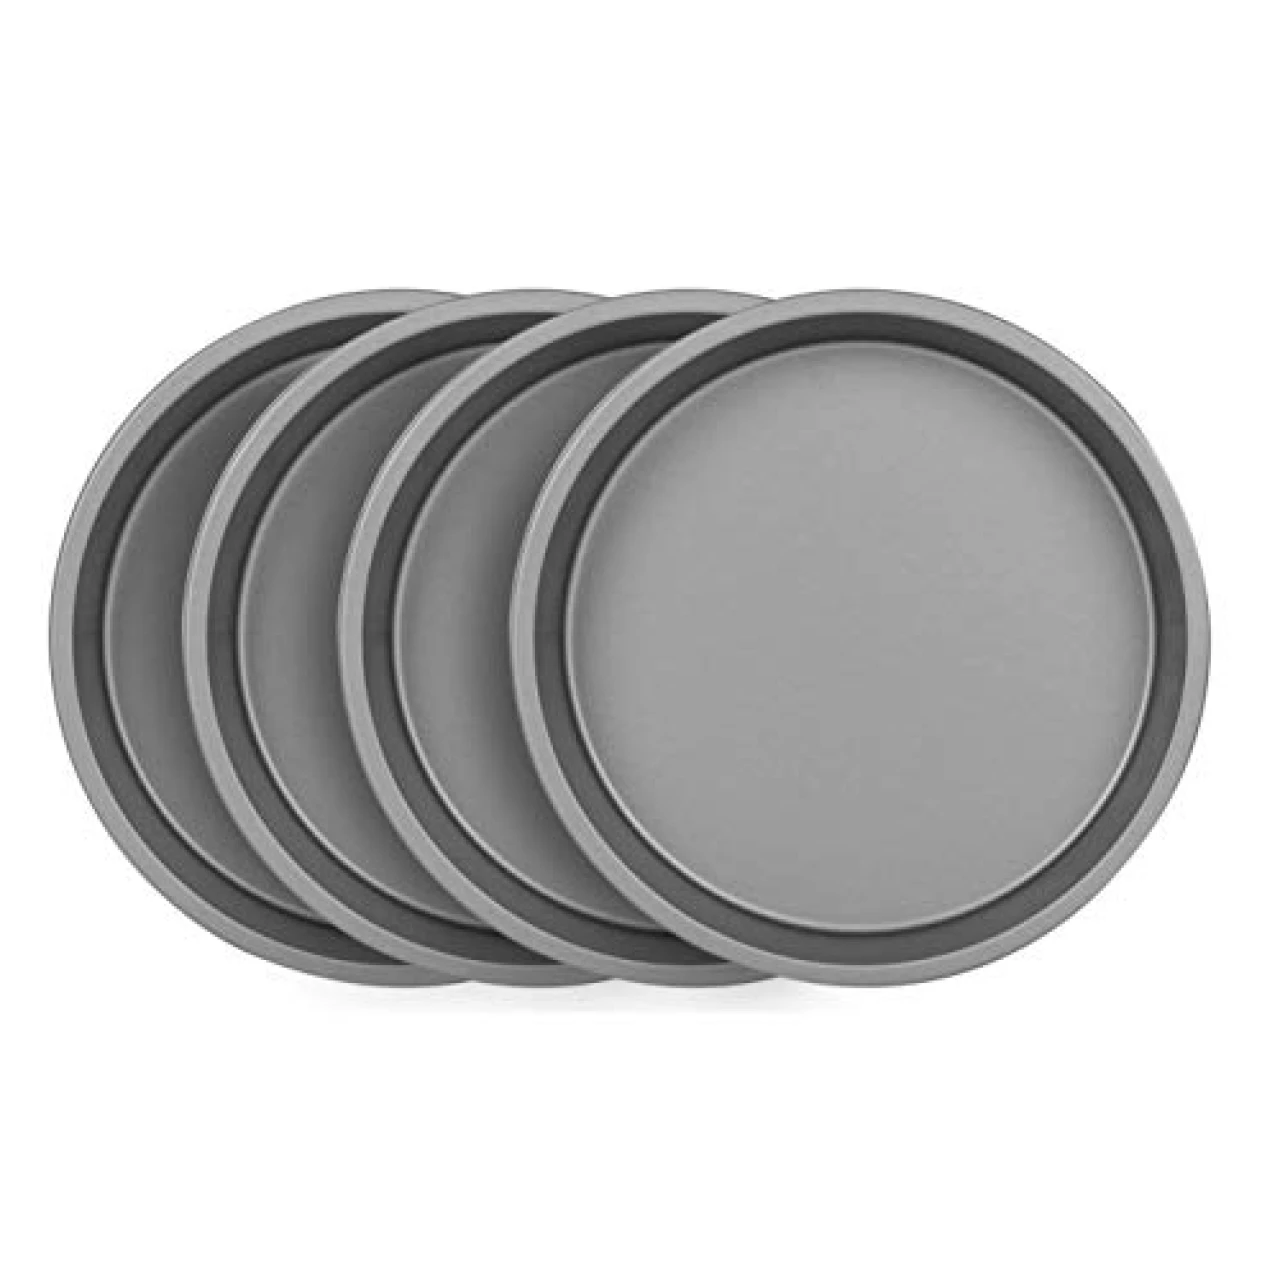 G &amp; S Metal Products Company Baker Eze 9&quot; Round Cake Pan, Set of 4